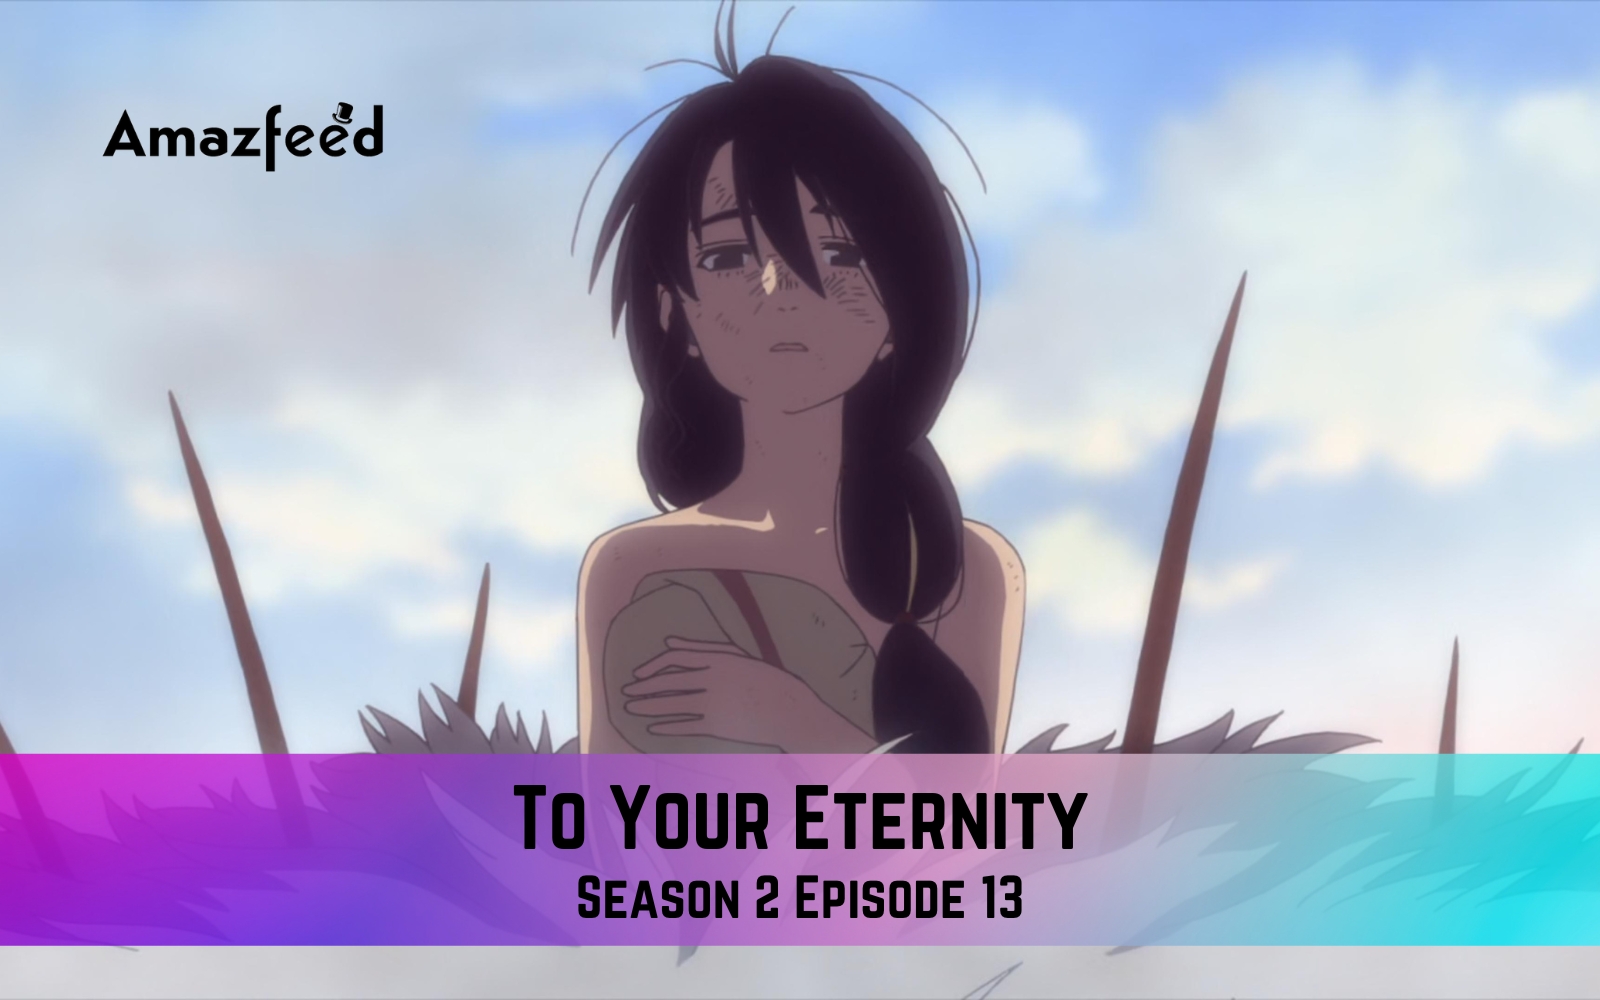 To Your Eternity Season 2 Episode 13 Recap and Ending, Explained